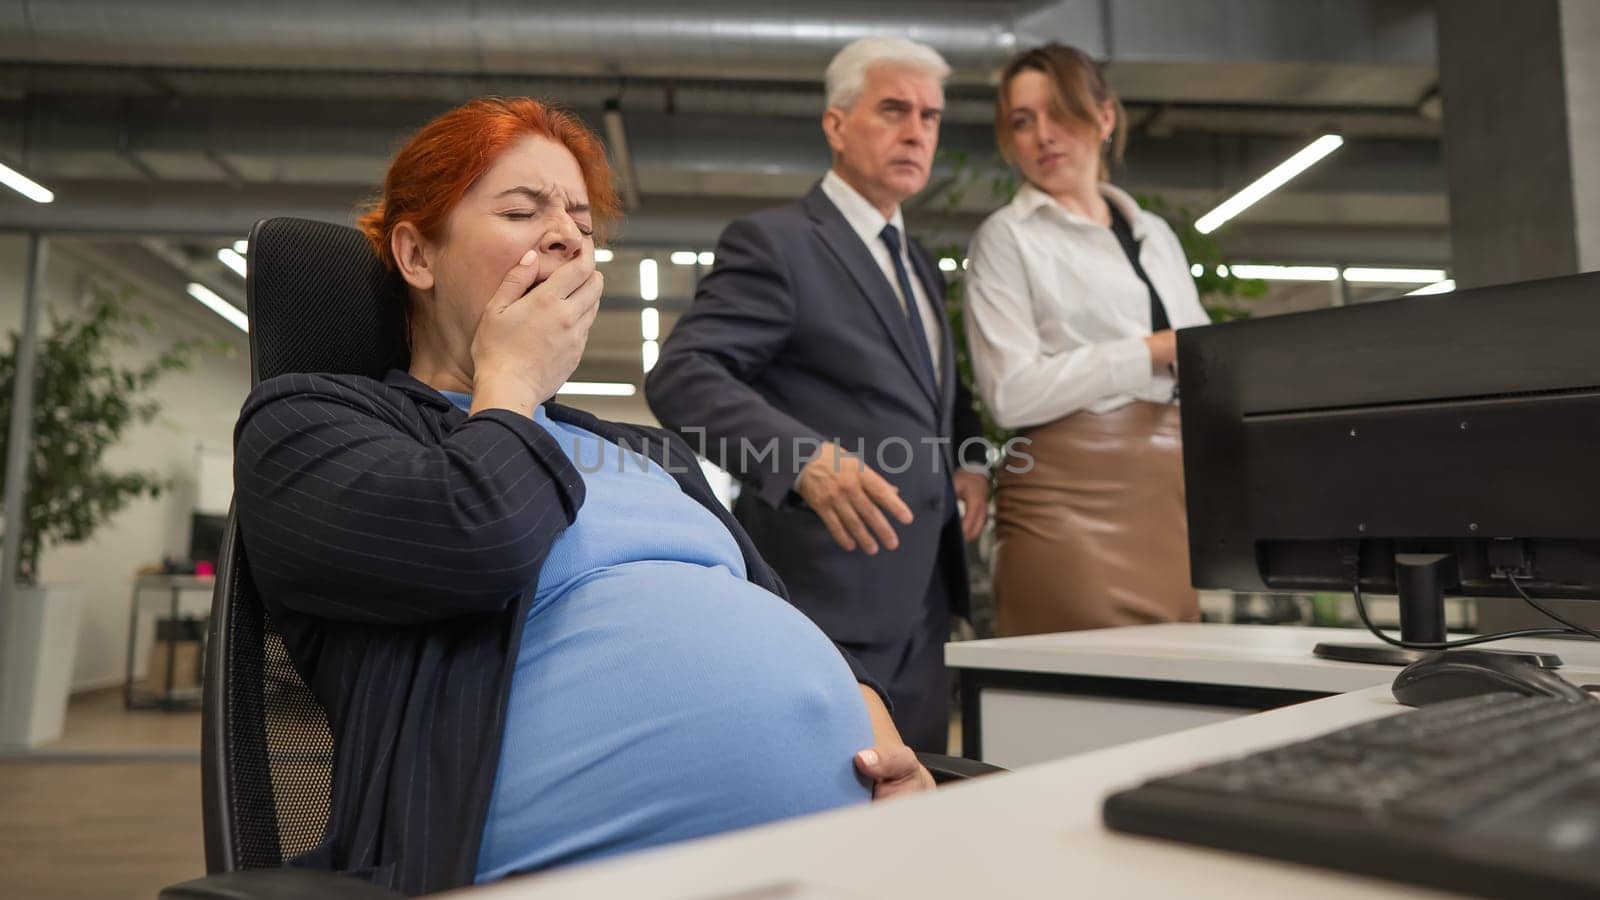 Pregnant woman yawns at work. Colleagues look disapprovingly